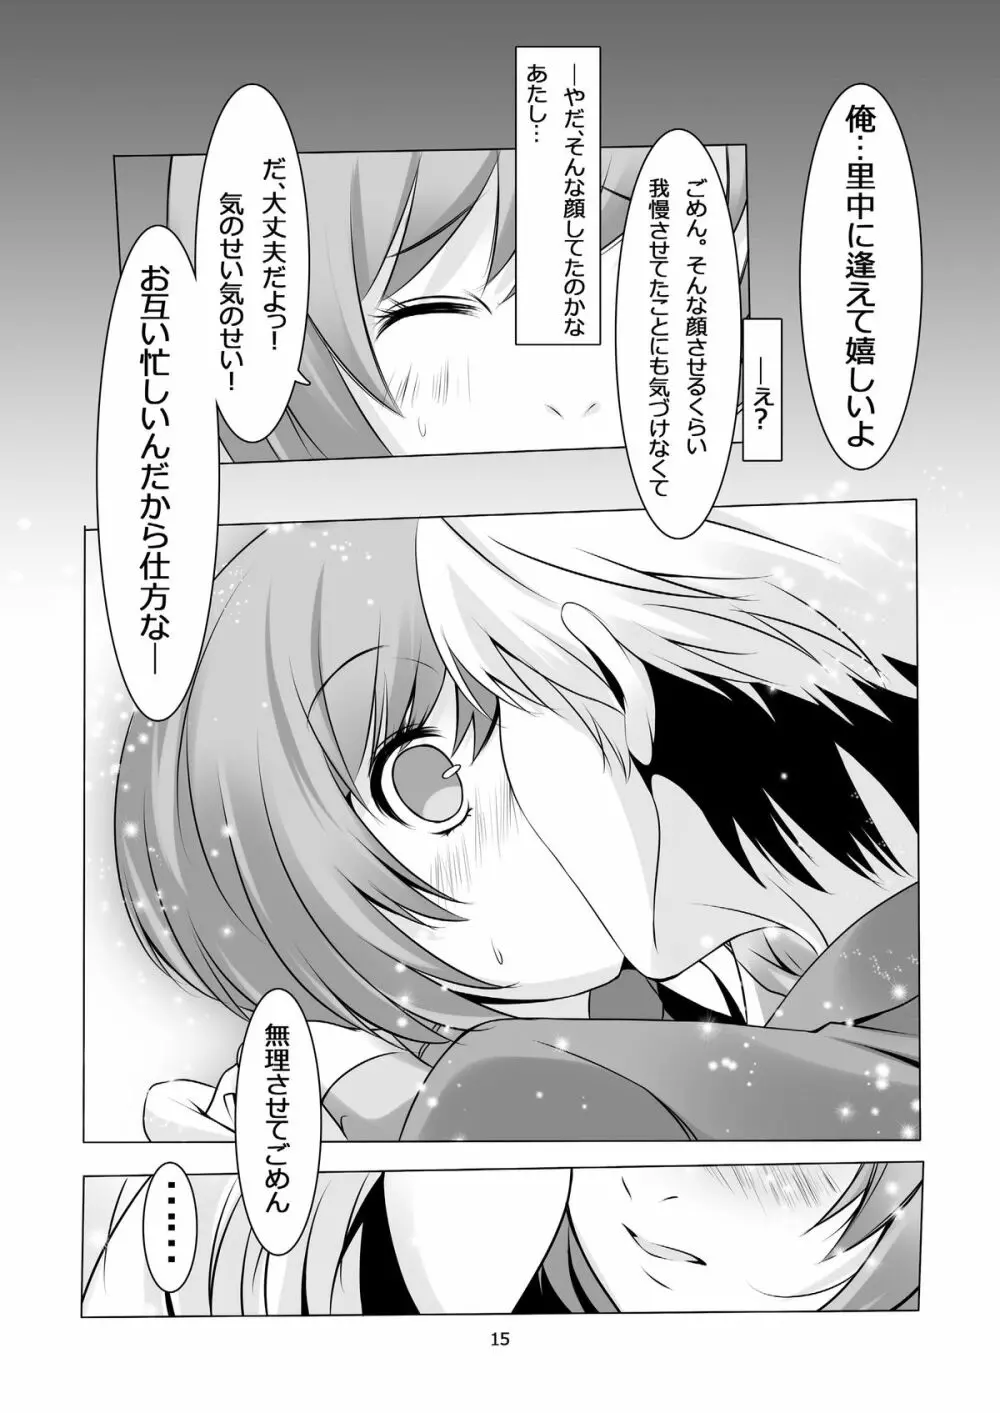 Persona 4: The Doujin #2 - page17